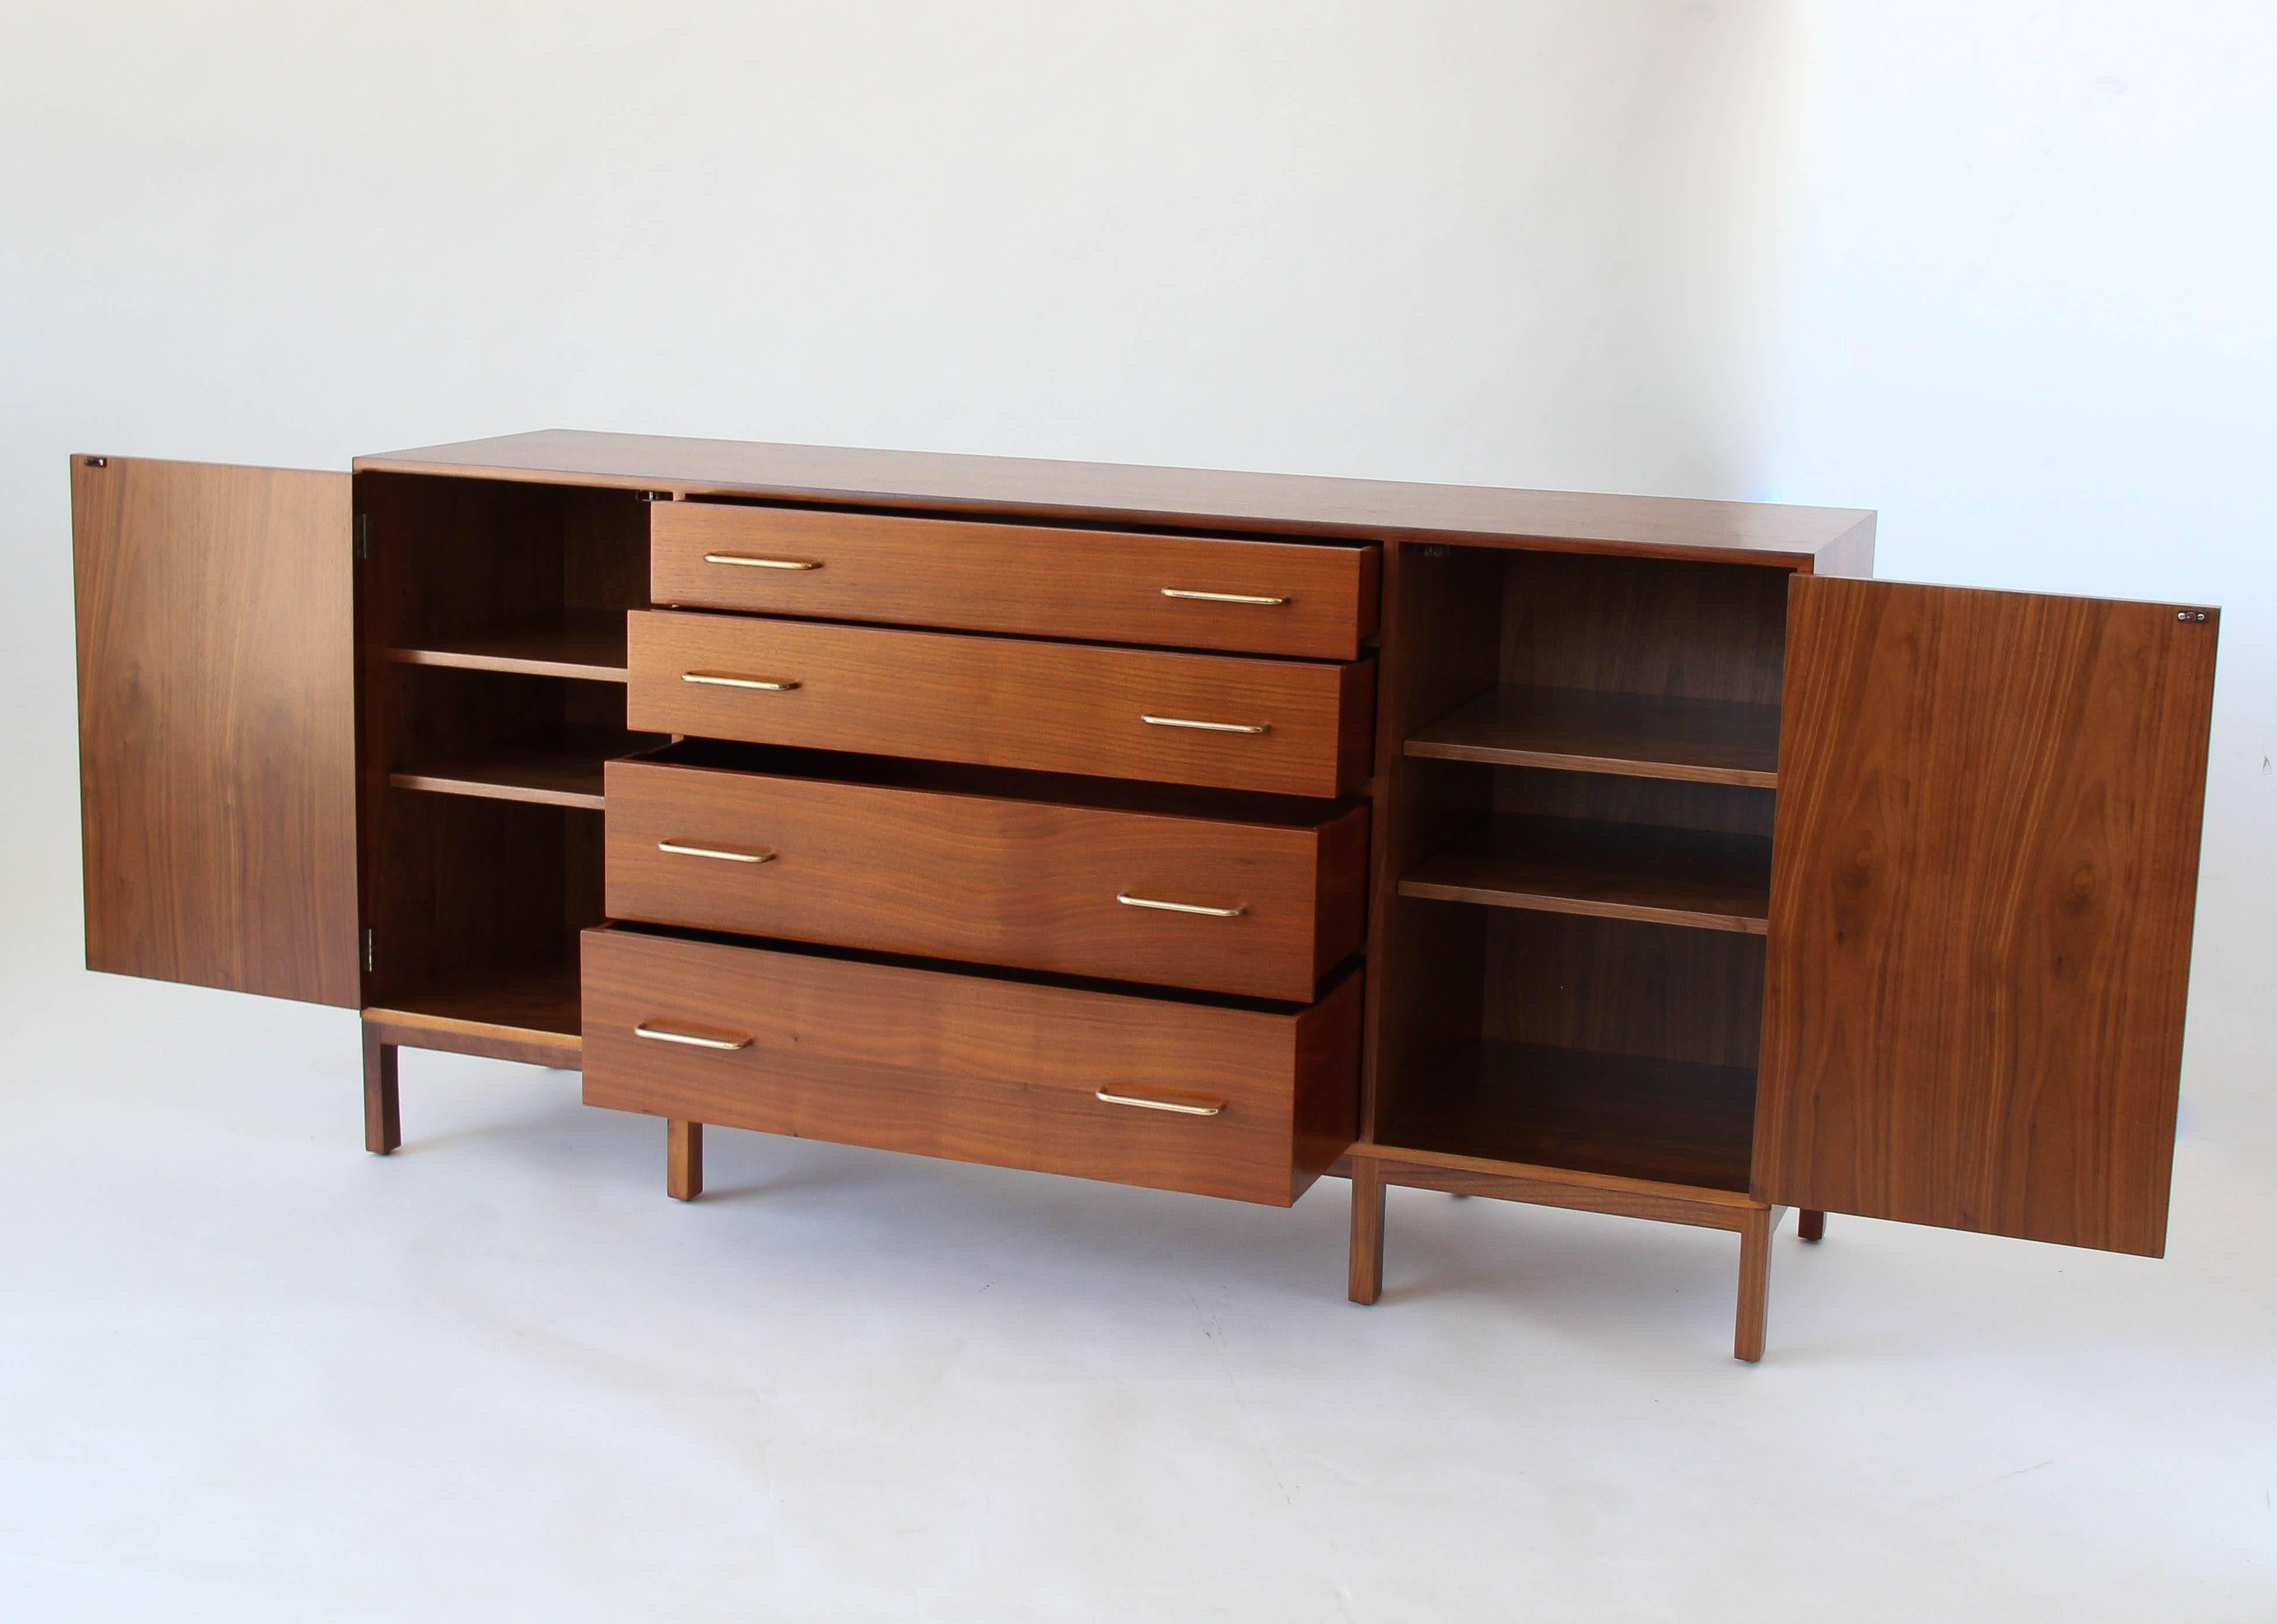 American Sideboard in Mahogany and Brass by Edward Wormley for Dunbar